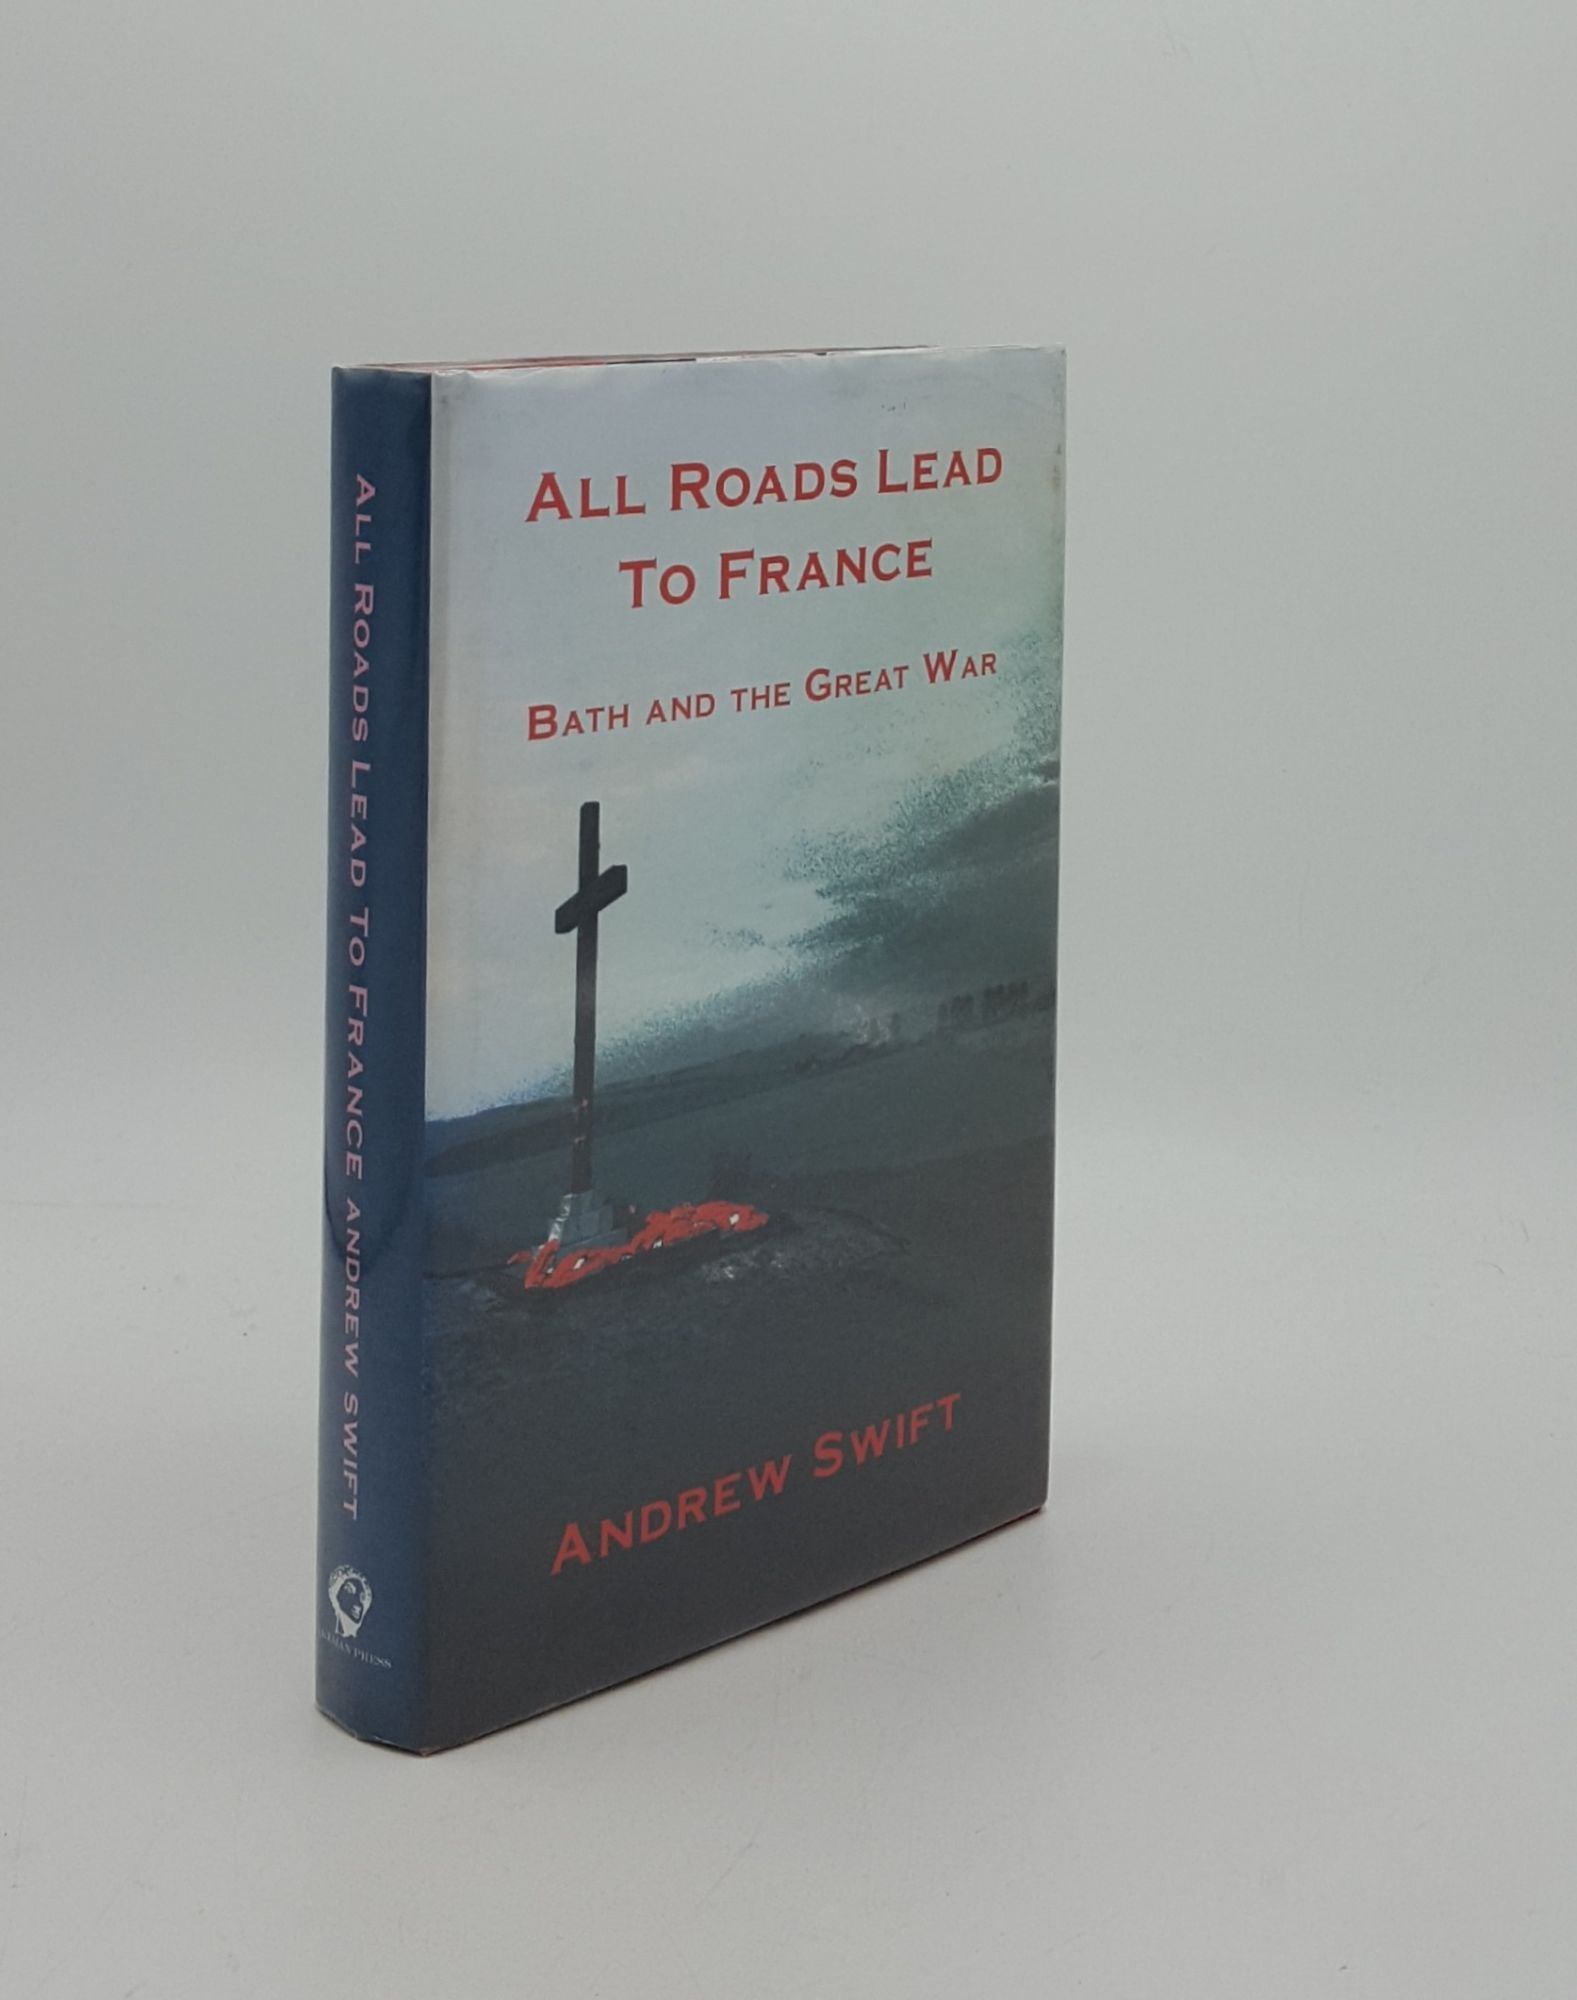 SWIFT Andrew - All Roads Lead to France Bath and the Great War